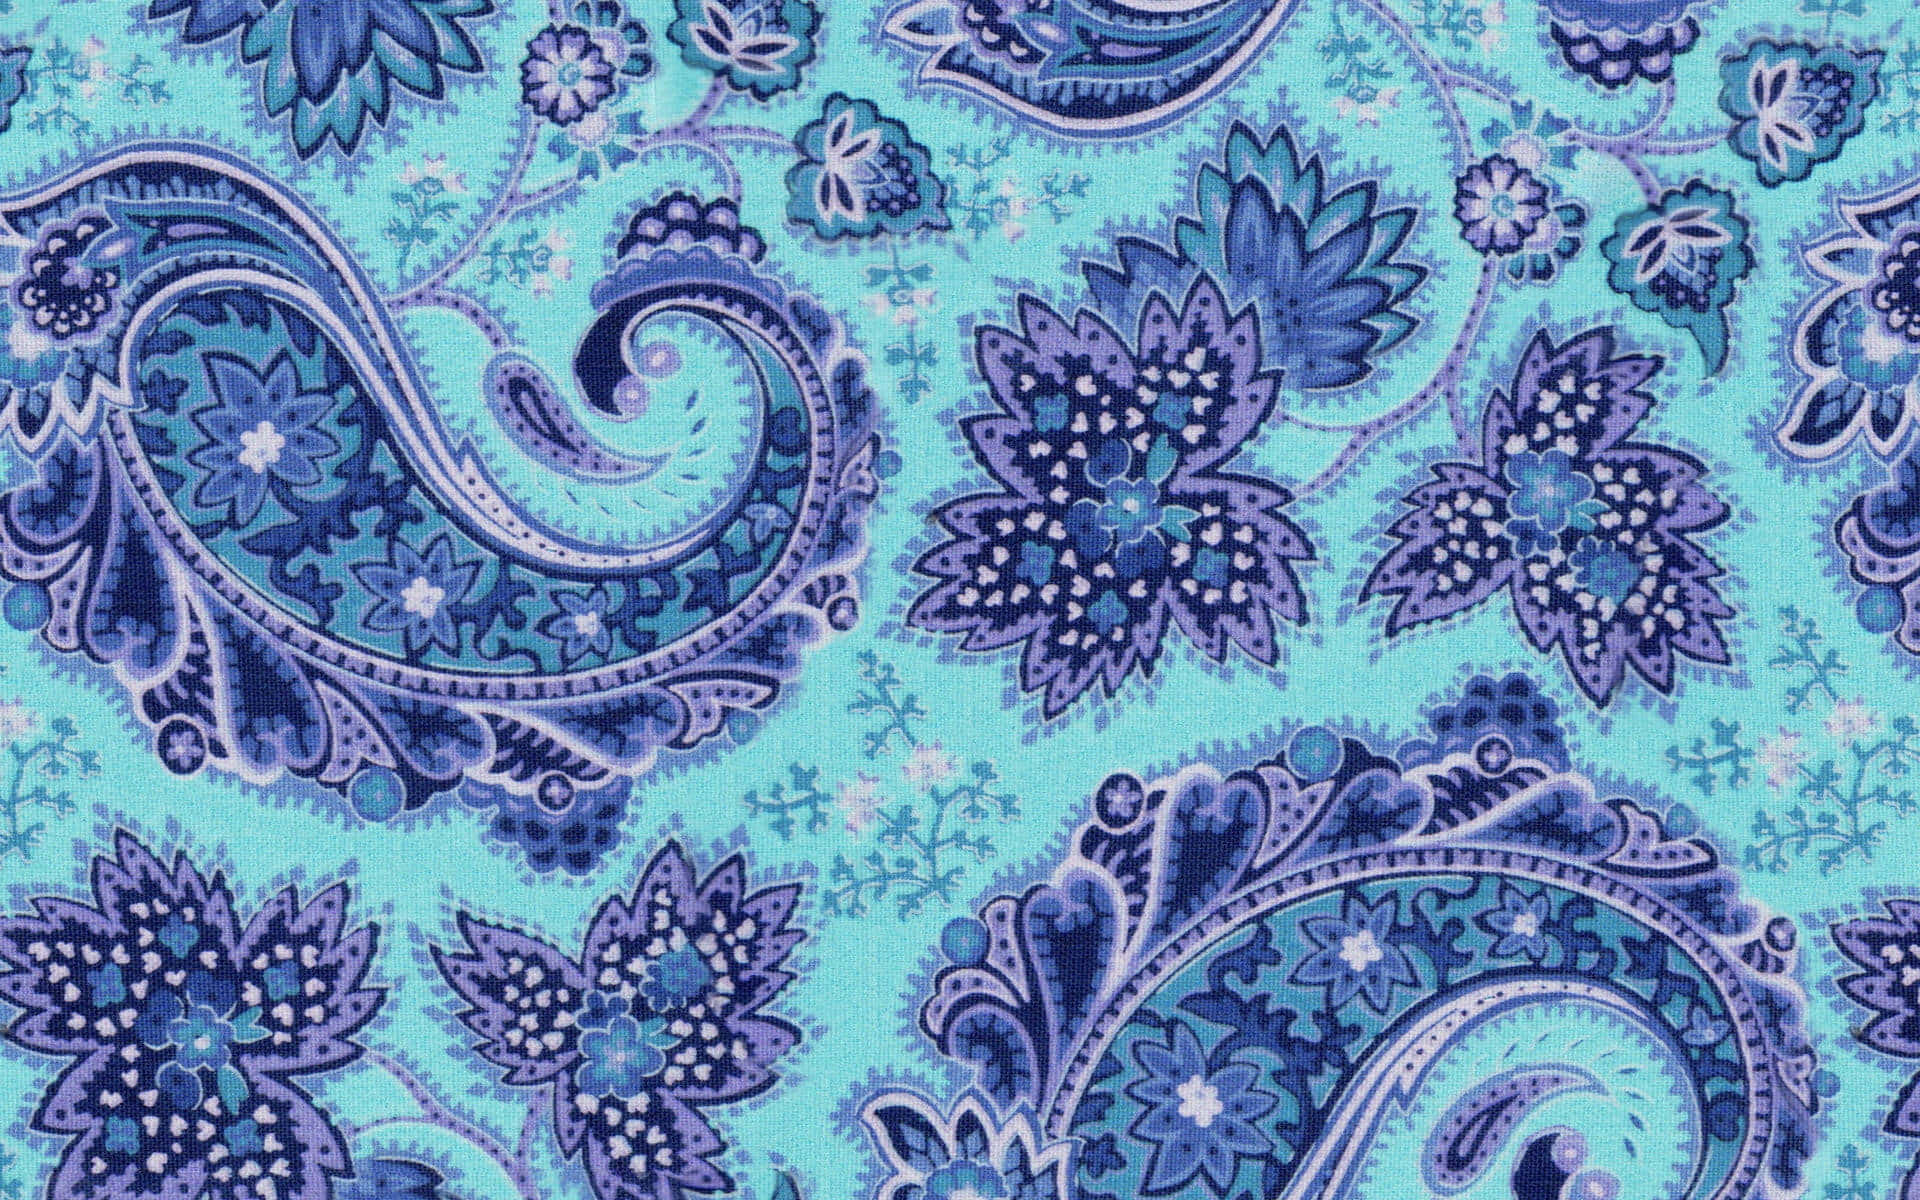 A Blue And White Paisley Print Fabric